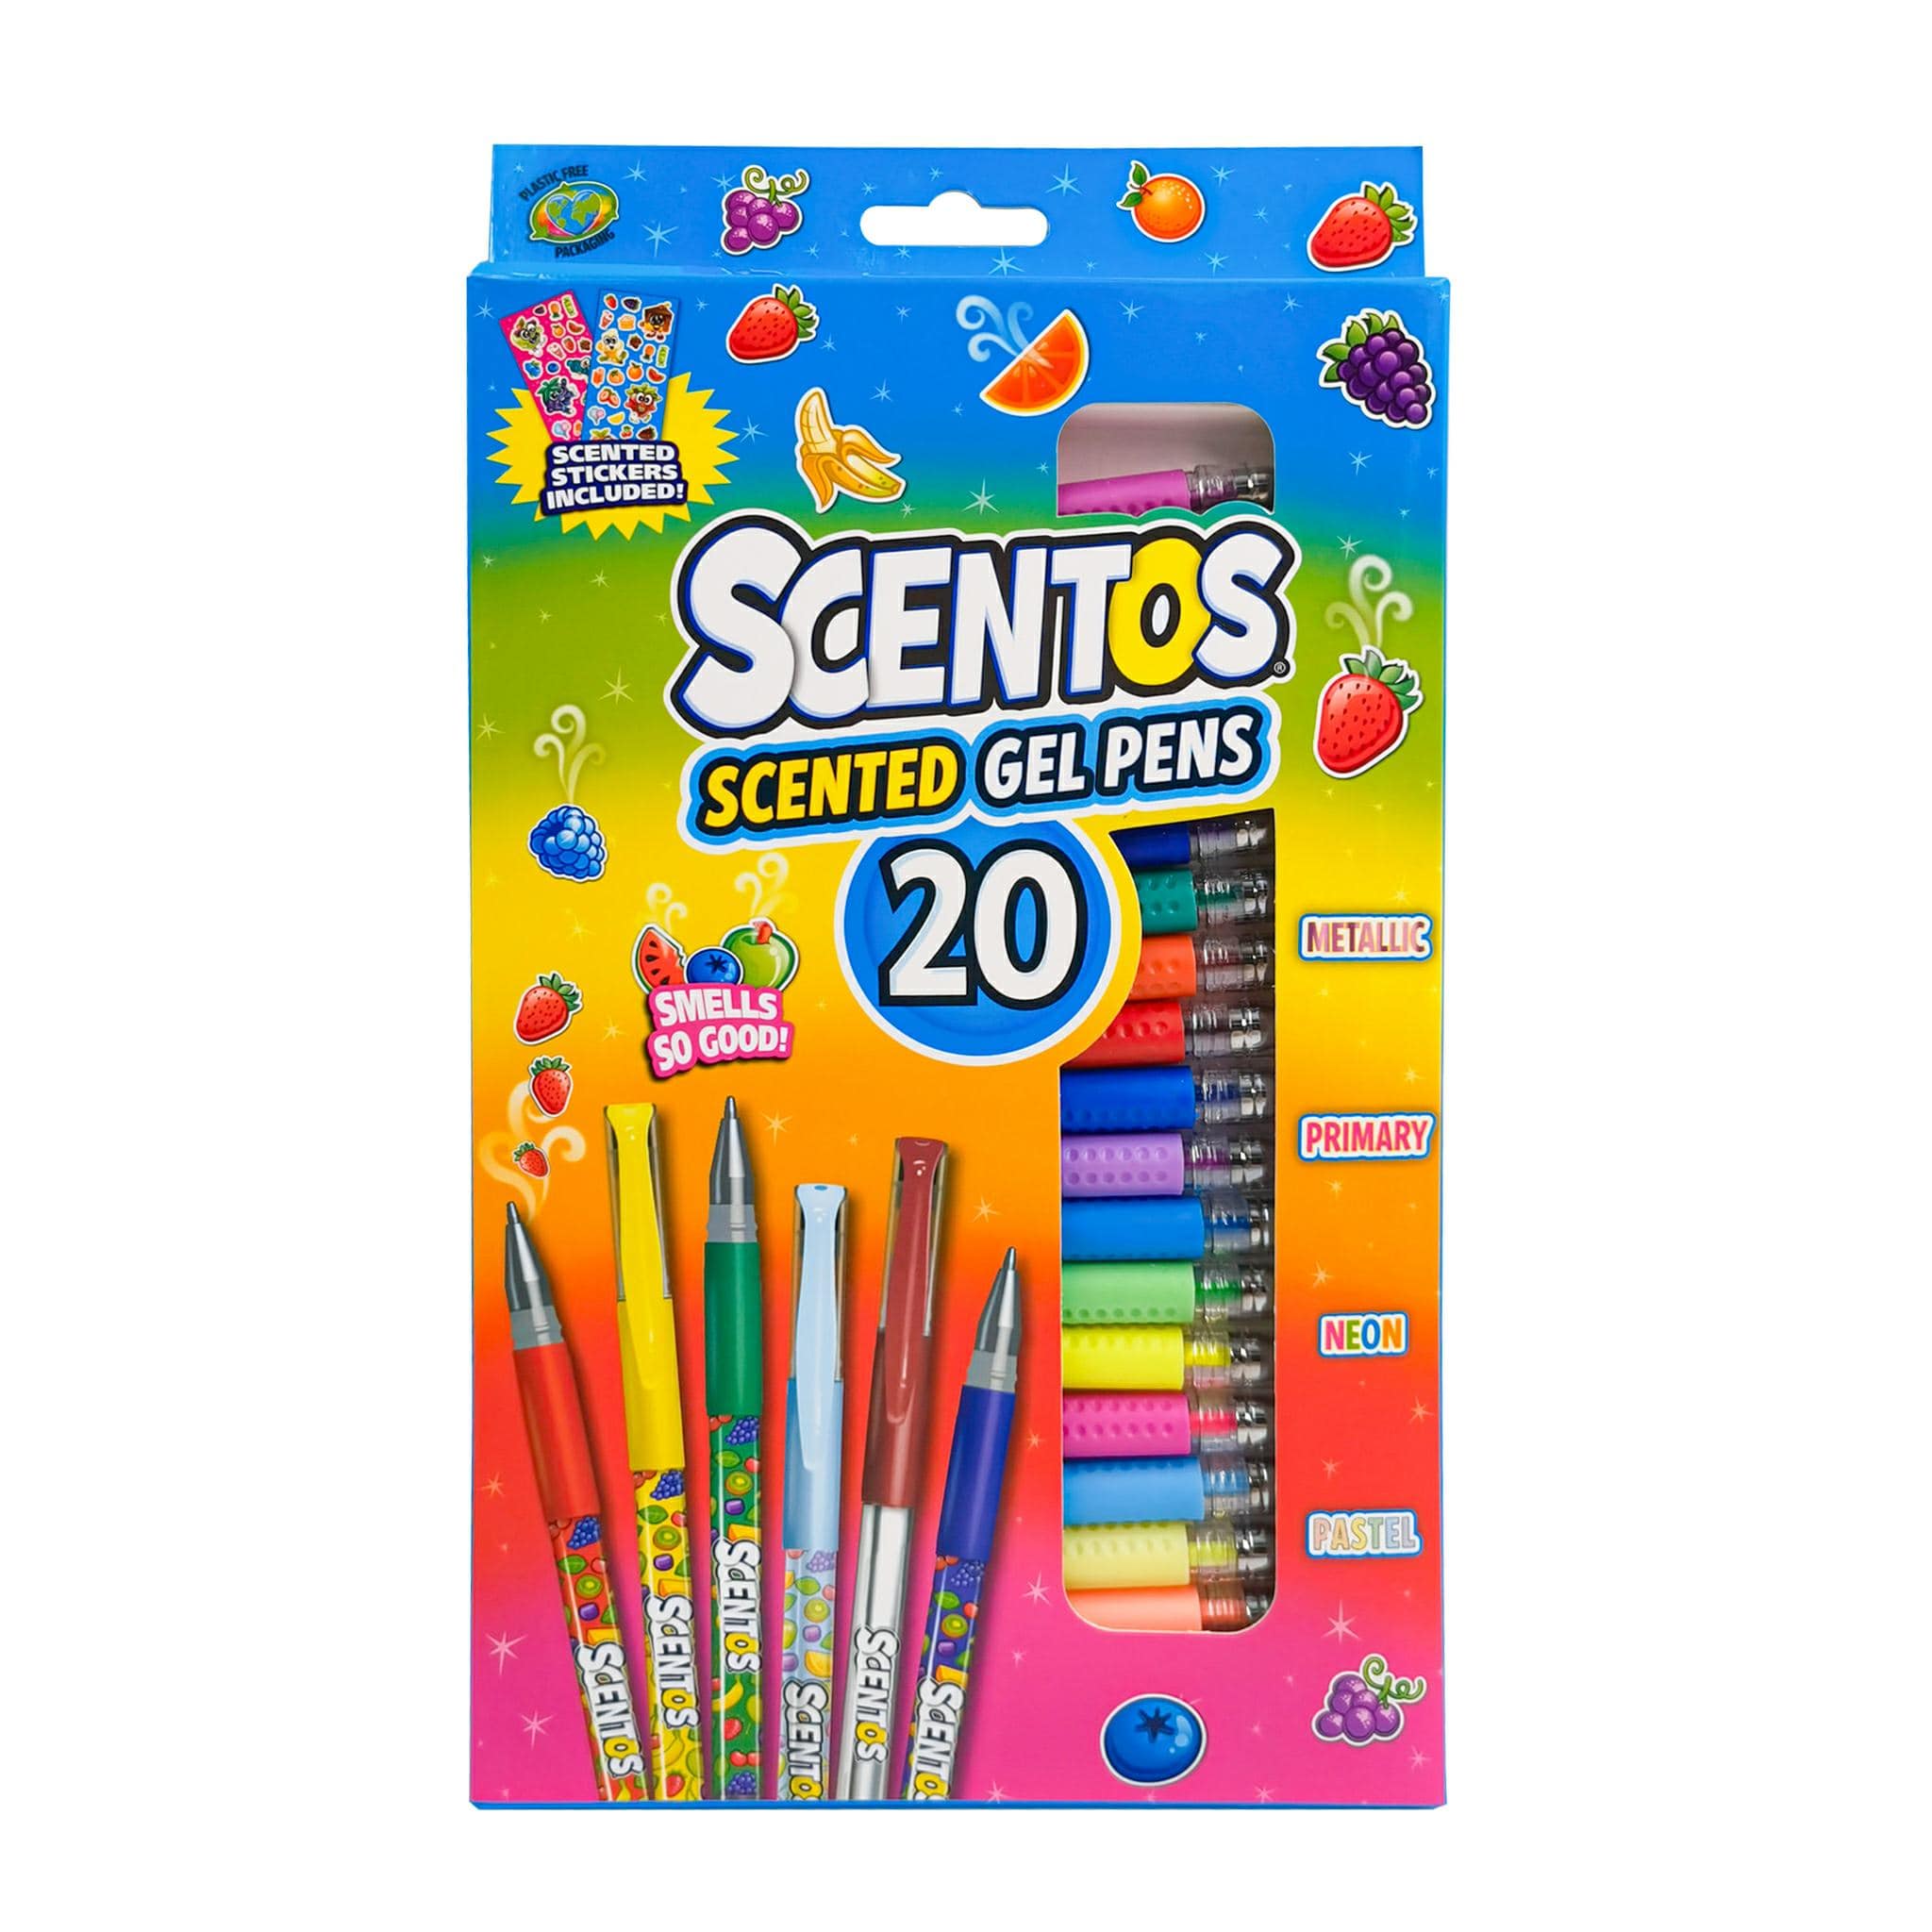 Scentos Scented Gel Pens for Kids - Assorted Colorful Pens - Fine Point Gel  Pen Set - For Ages 3 and Up - 20 Count